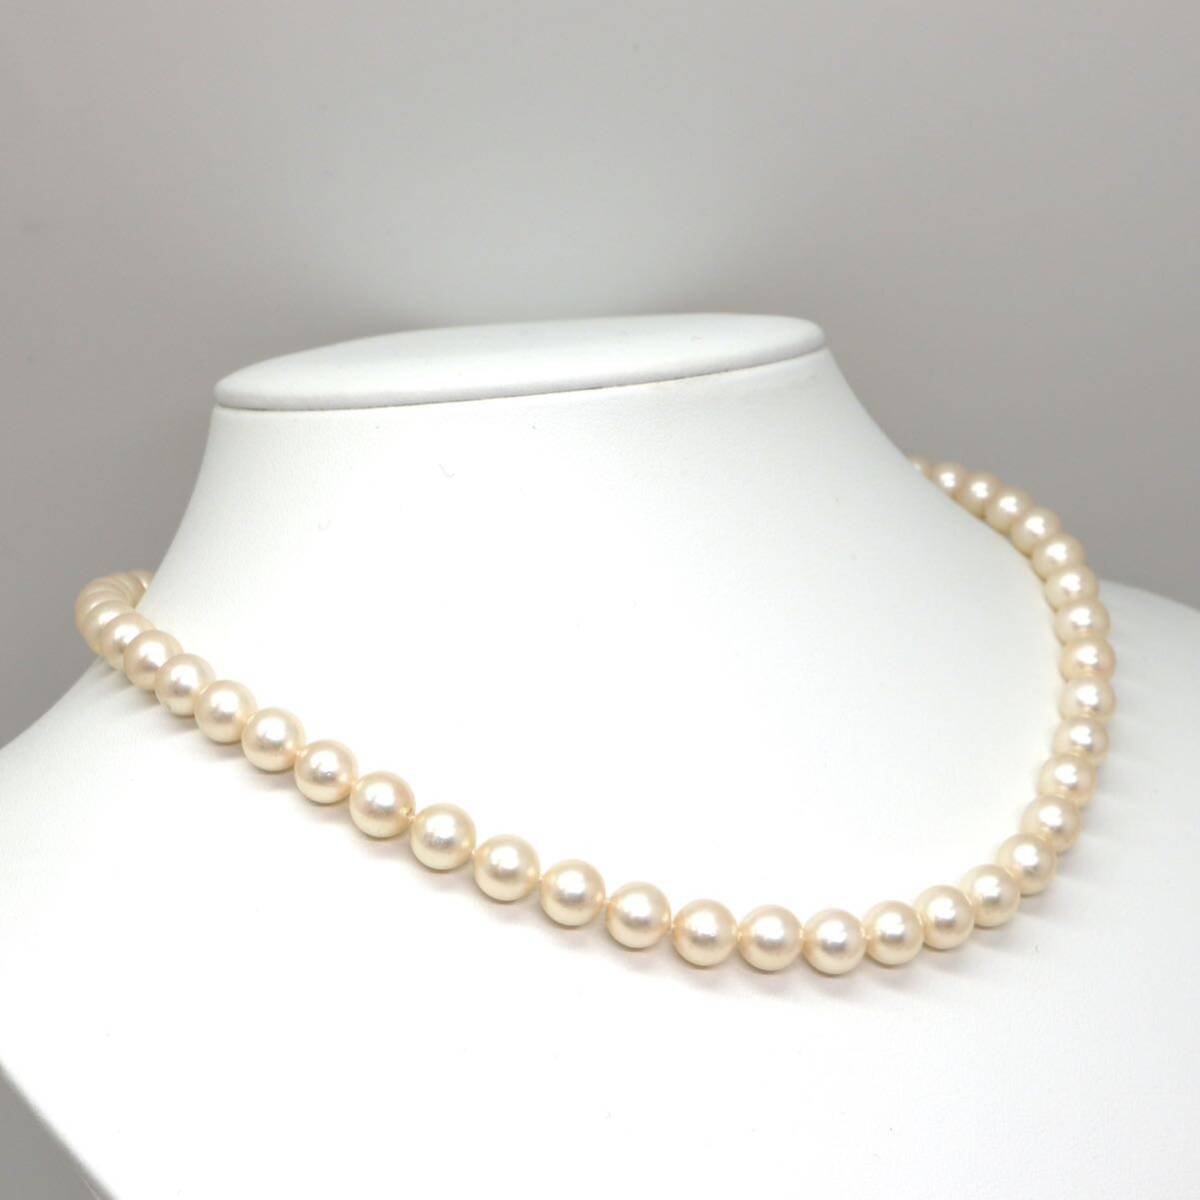 ◆K18 アコヤ本真珠ネックレス/ 17 ◆A 約30.2g 約42.0cm 7.0-7.5mm珠 pearl パール jewelry necklace ジュエリー EA3/EA3_画像3